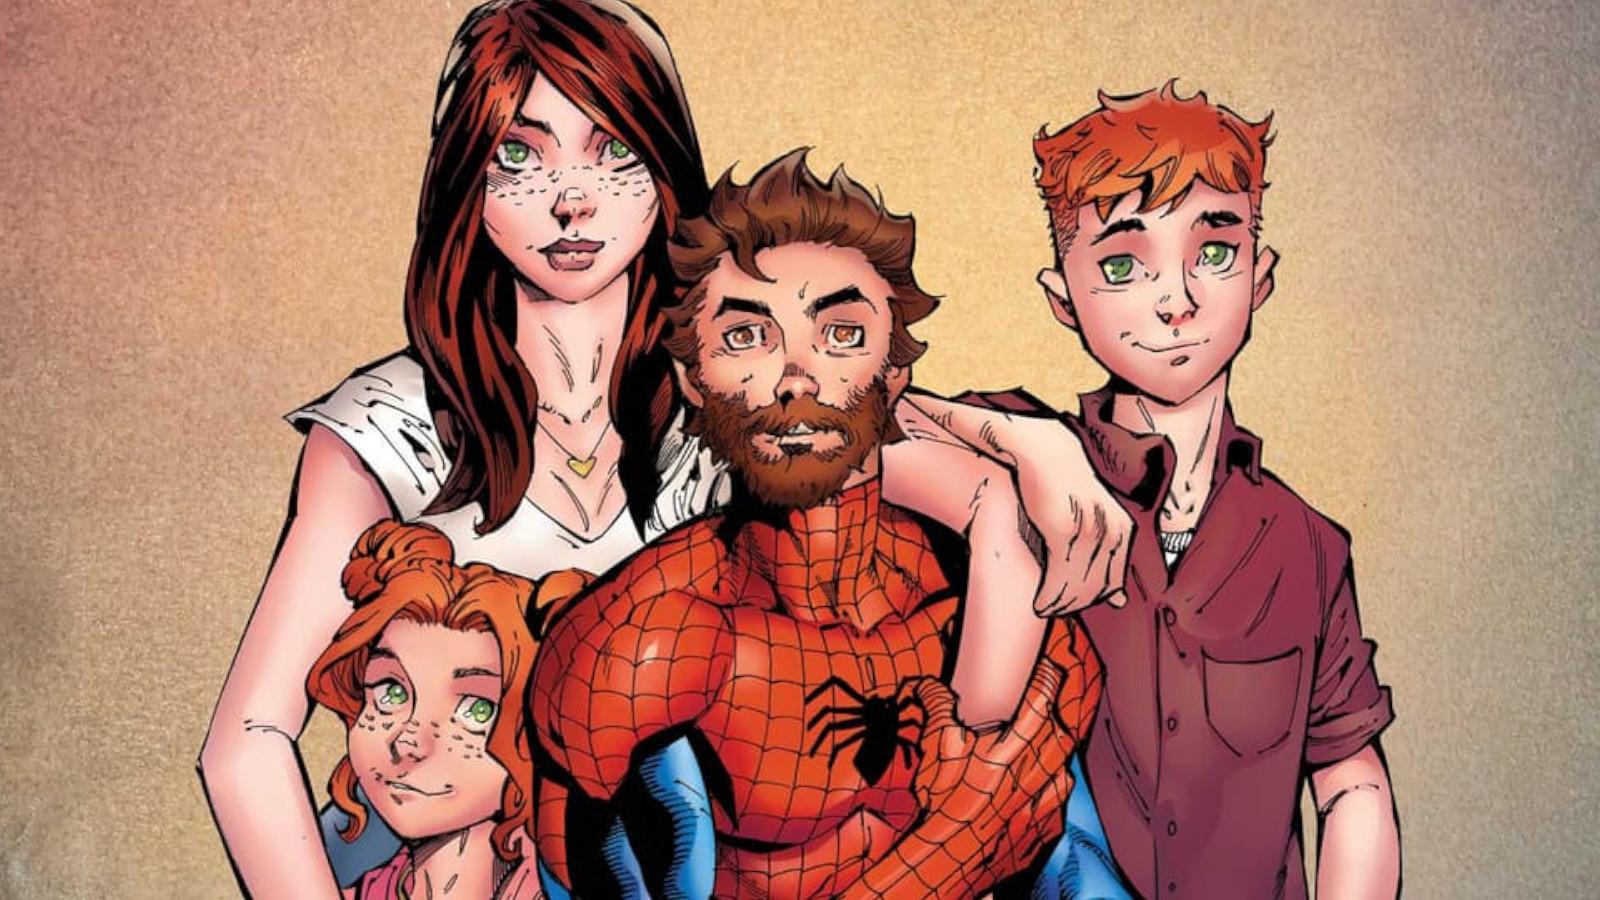 Ultimate Spider-Man #1 art depicting the Parker family